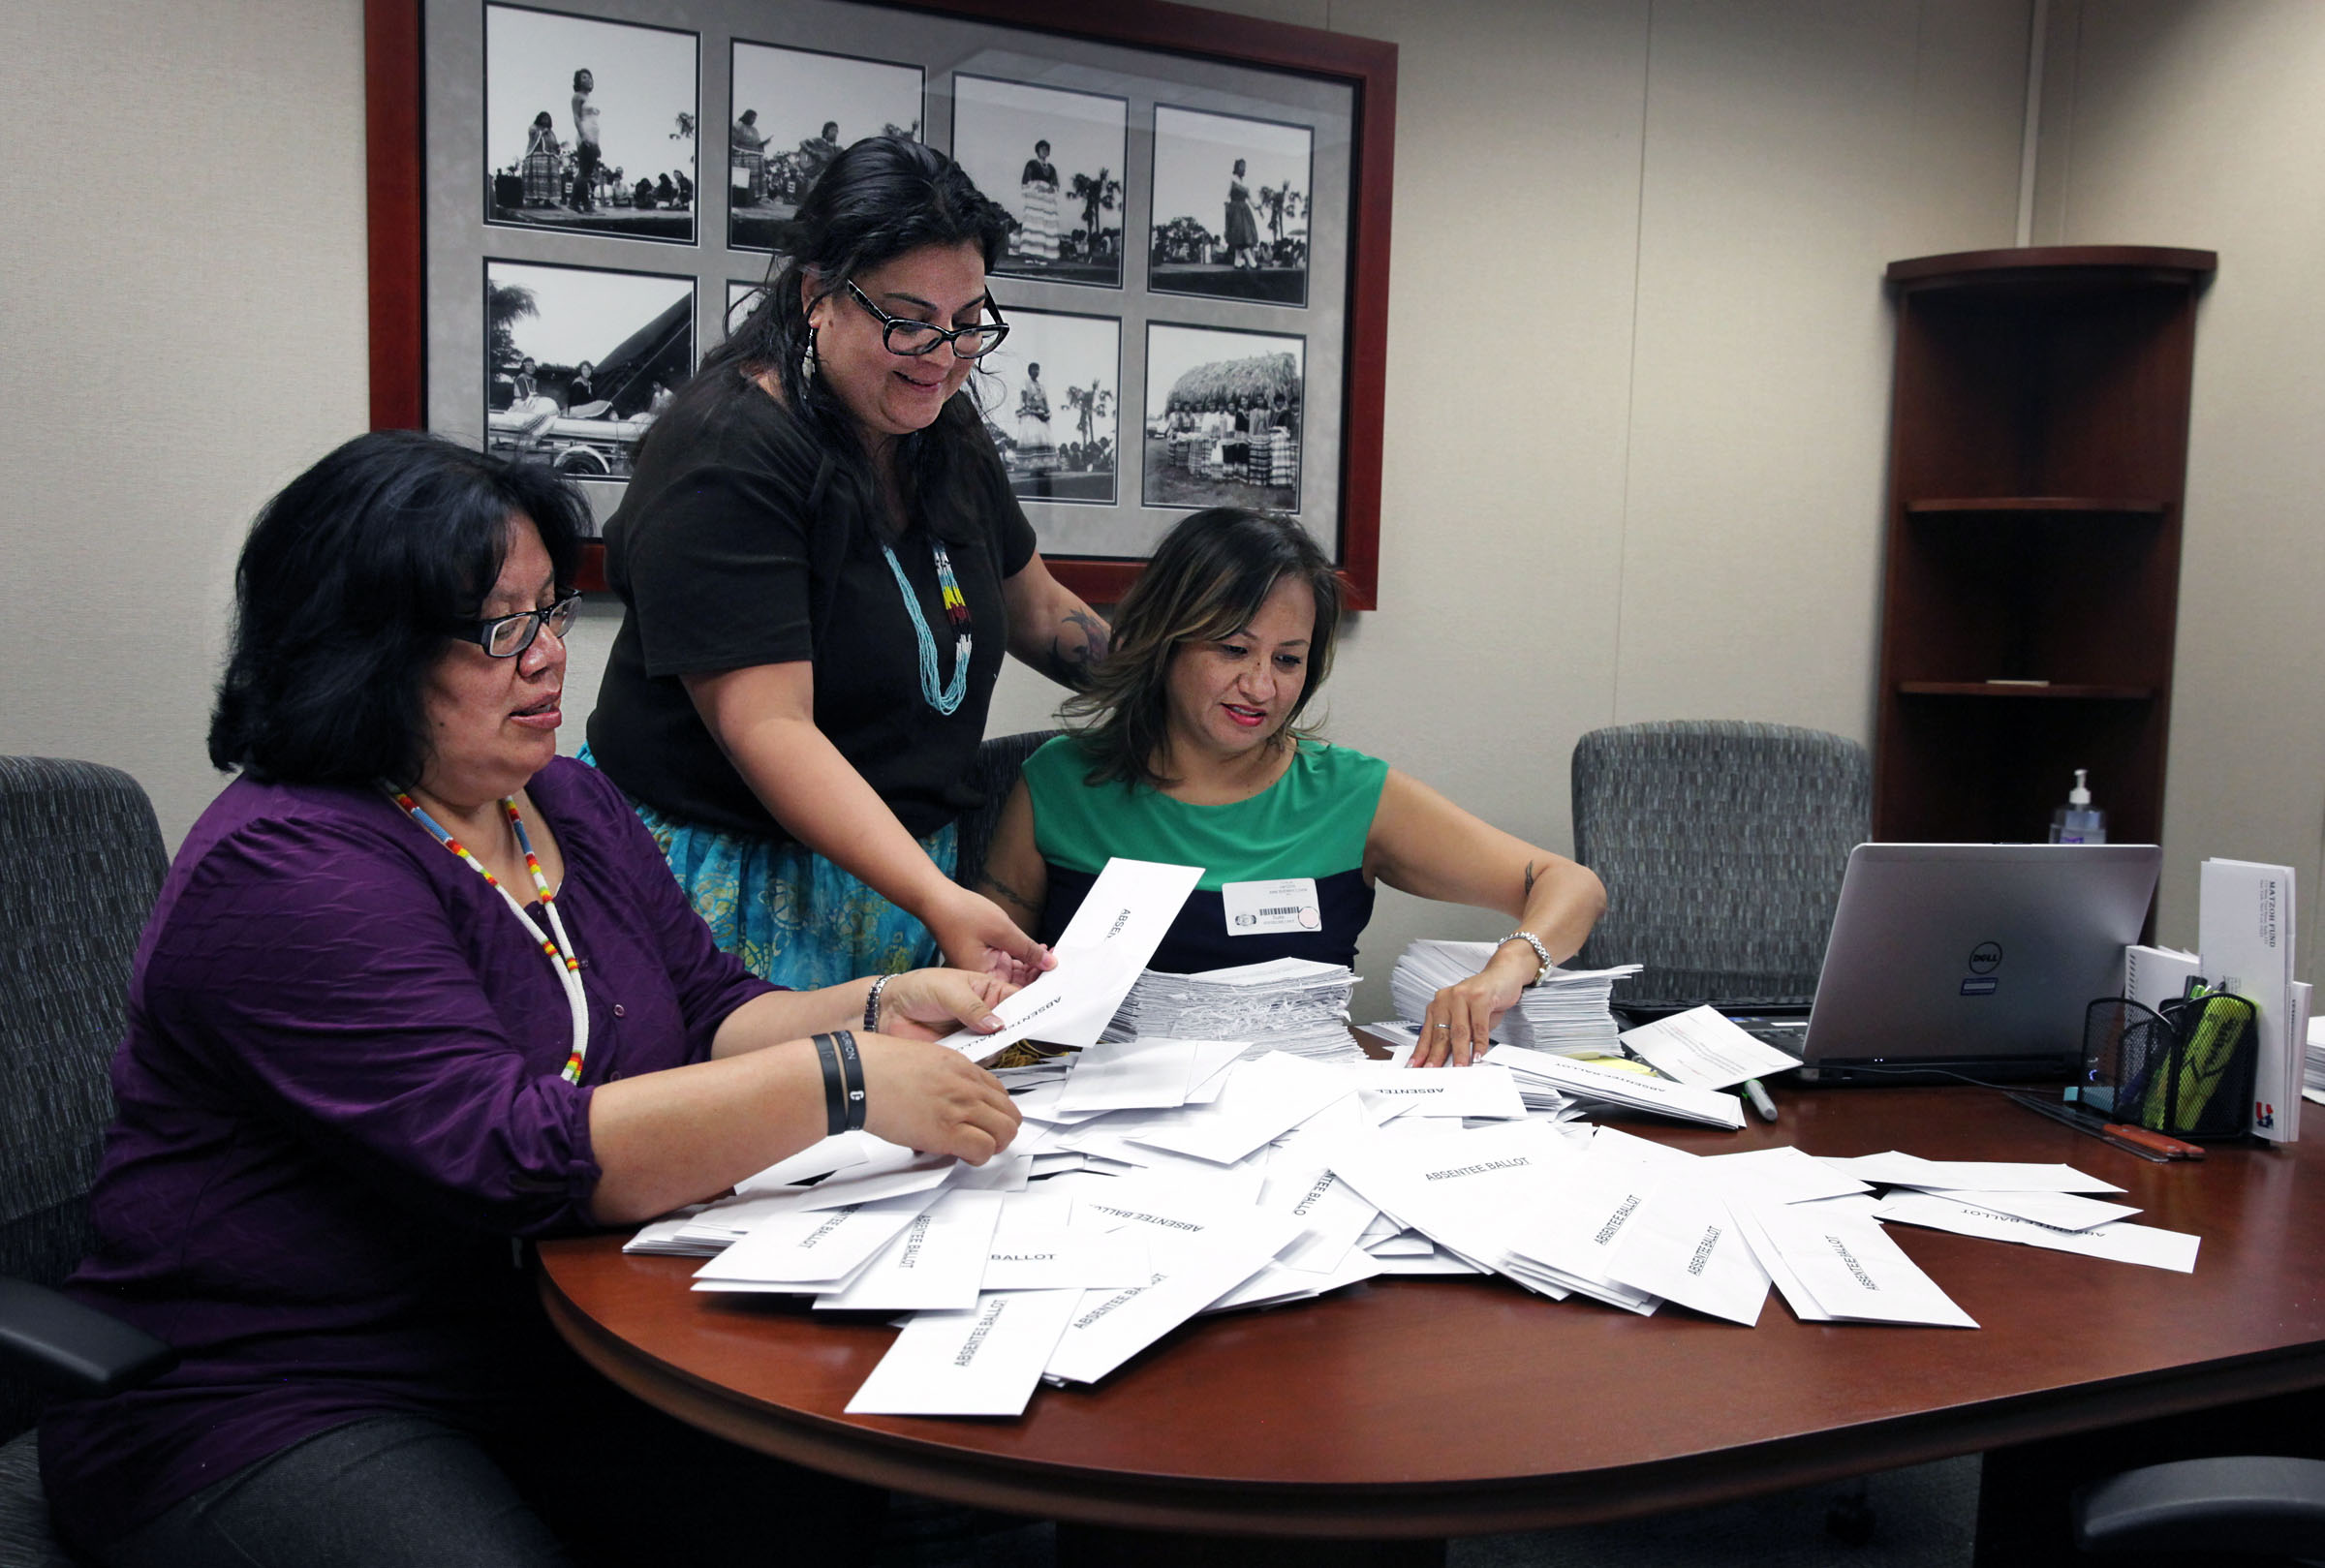 Supervisor of Elections Naomi Wilson, Tribal Secretary LaVonne Rose and Bureau of Indian Affairs government officer Sherry Lovin look over the ballots cast for the election for an additional seat on Tribal Council to represent the Immokalee community.